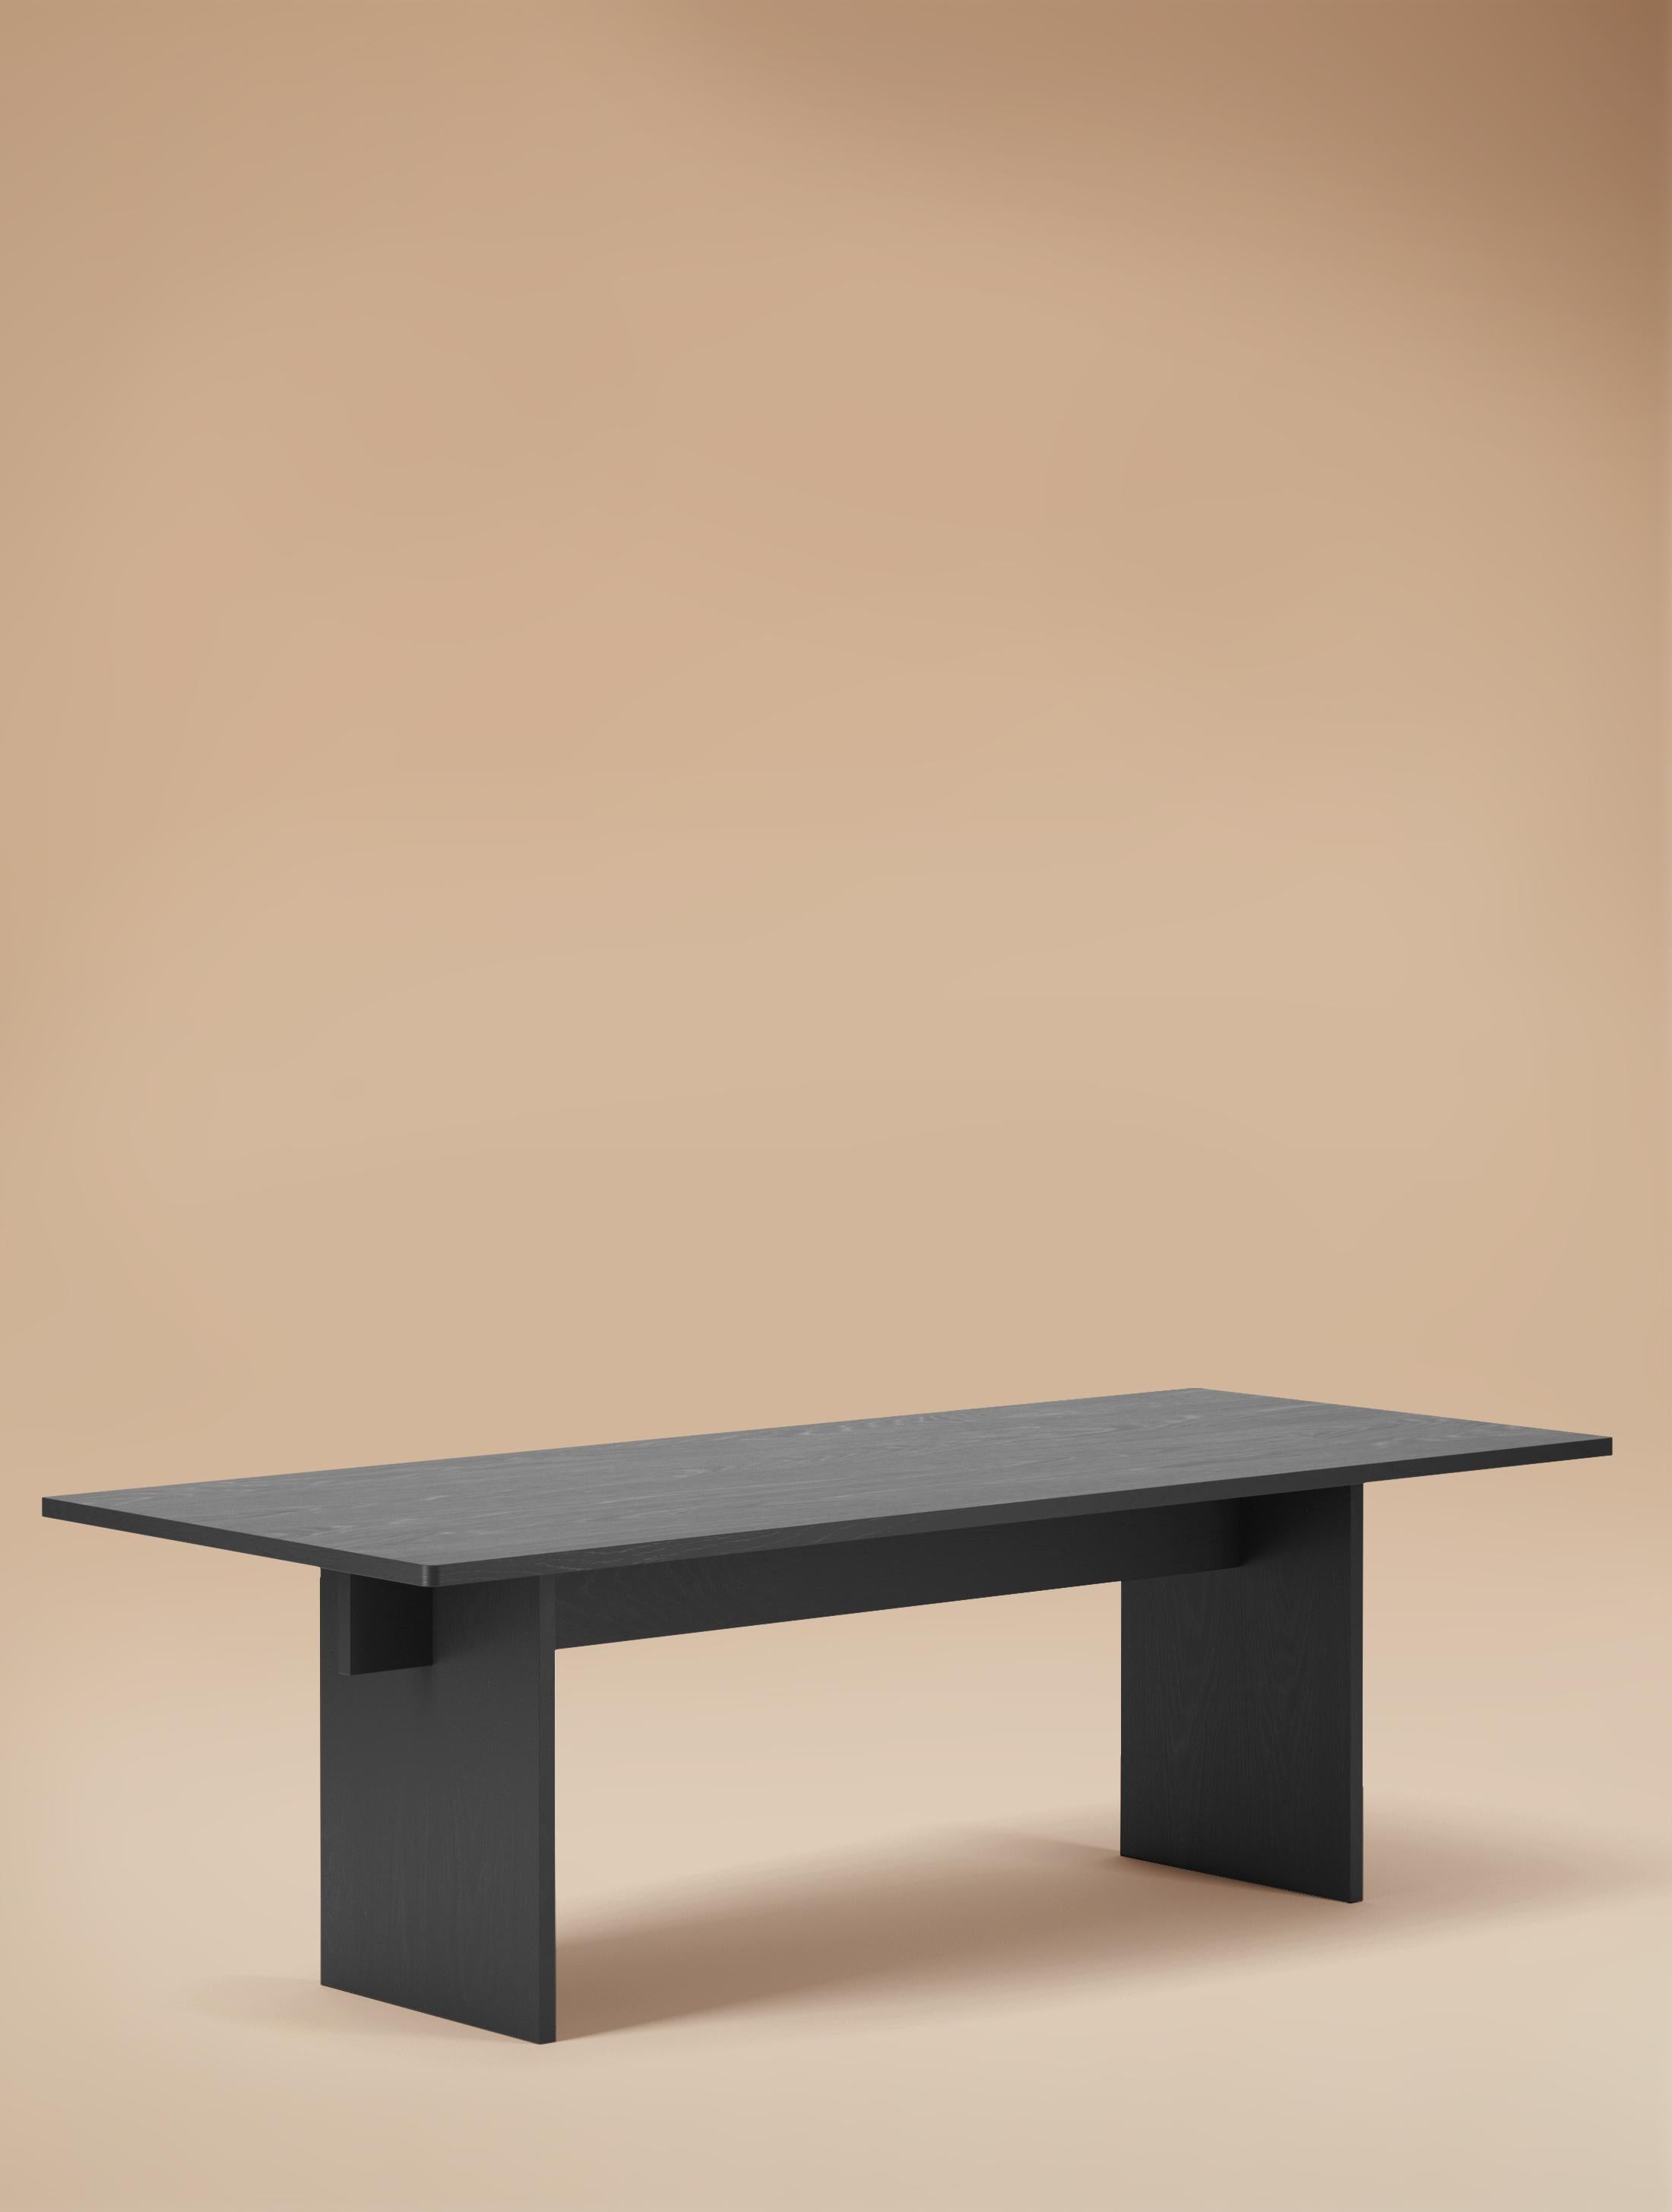 8 Seater  Faure Table Handcrafted in Walnut by Kevin Frankental for Lemon  9